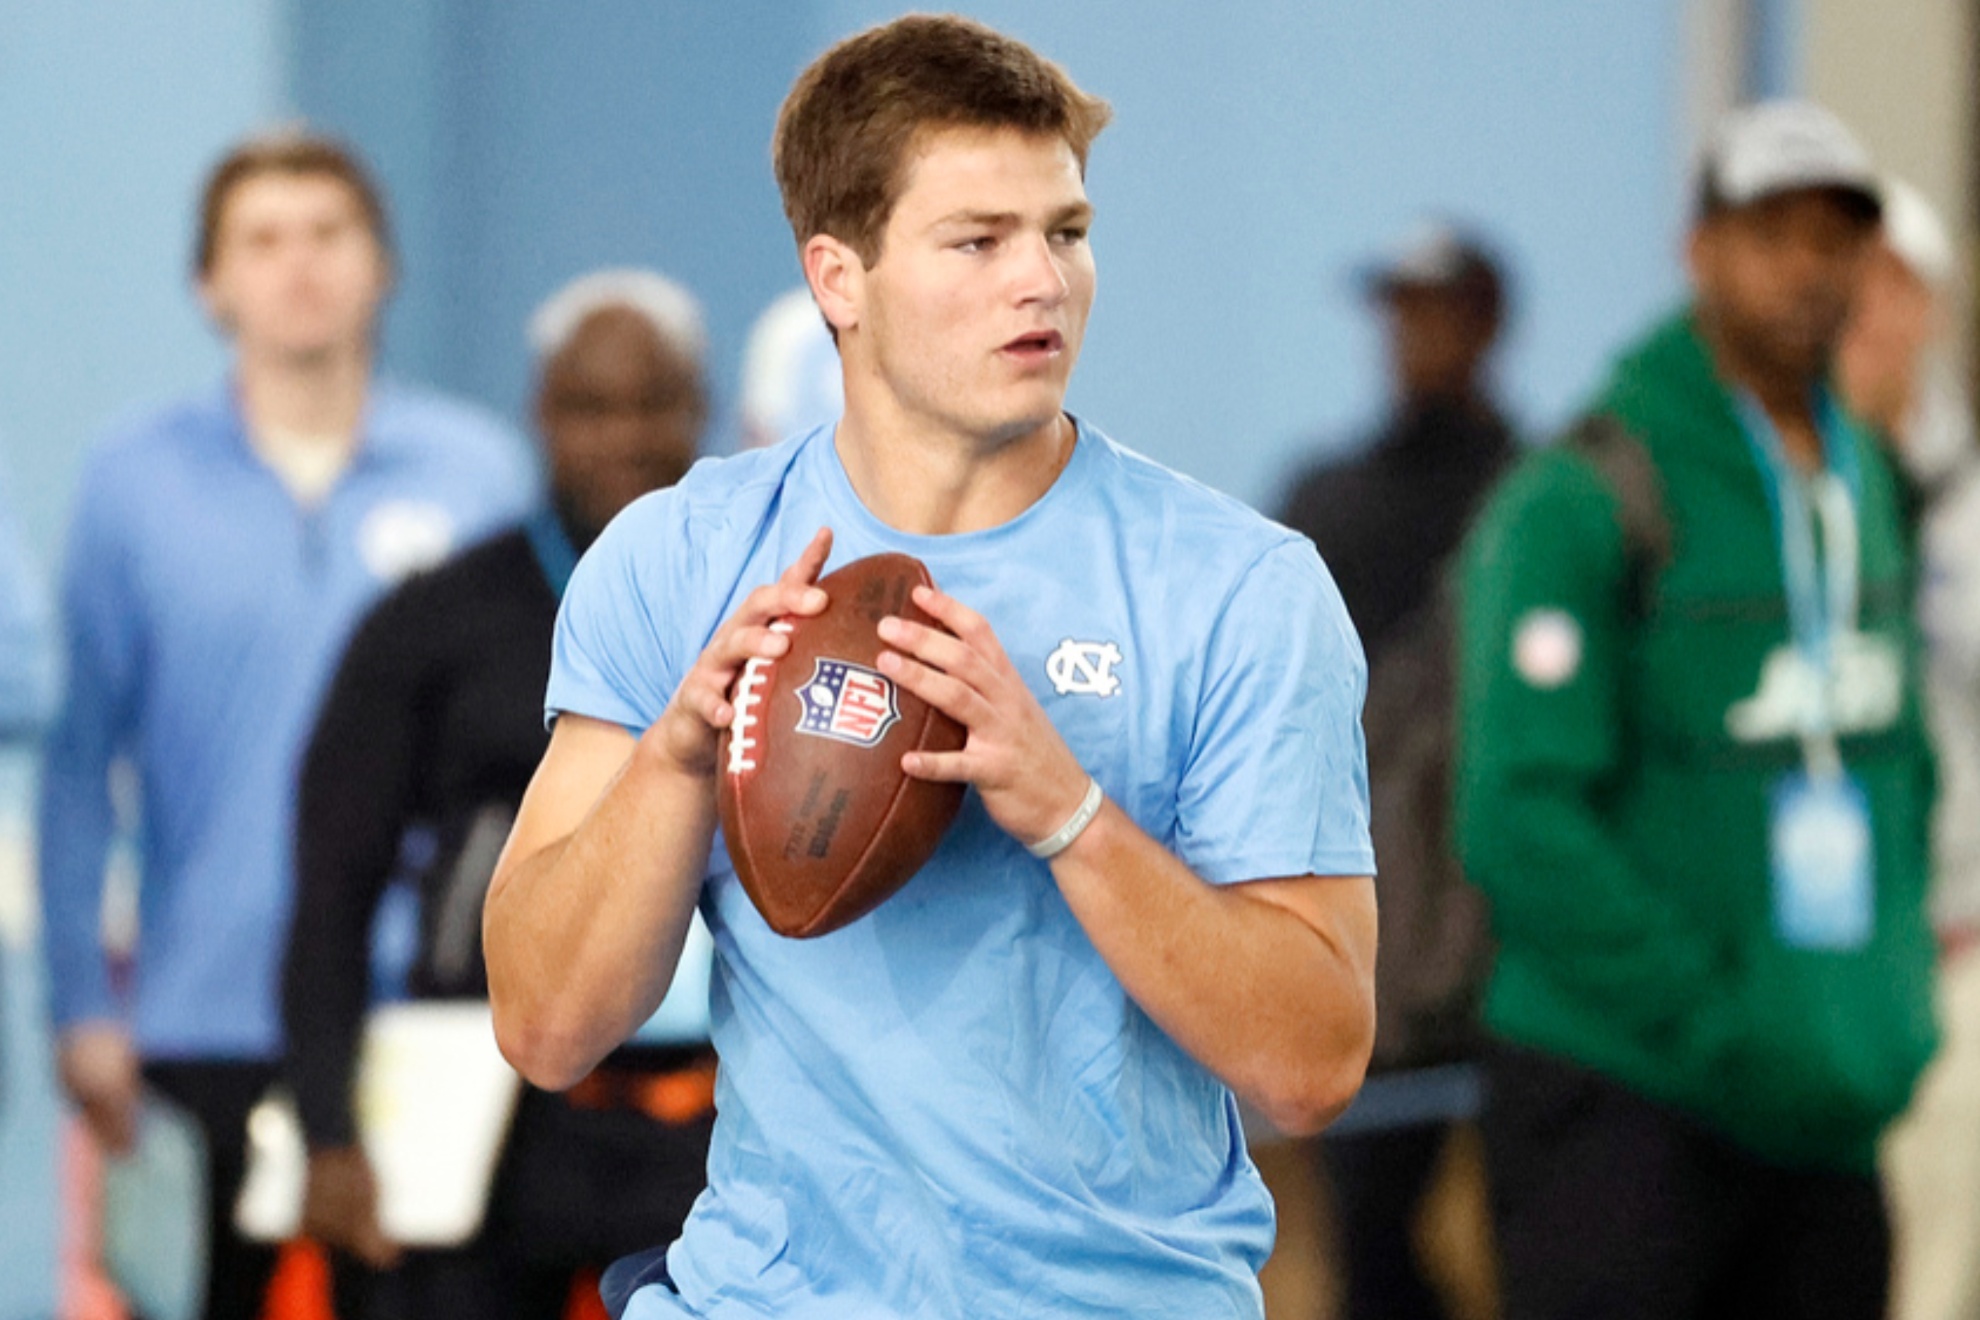 NFL prospect Drake Maye has received interest from the Vikings, Redskins and Broncos